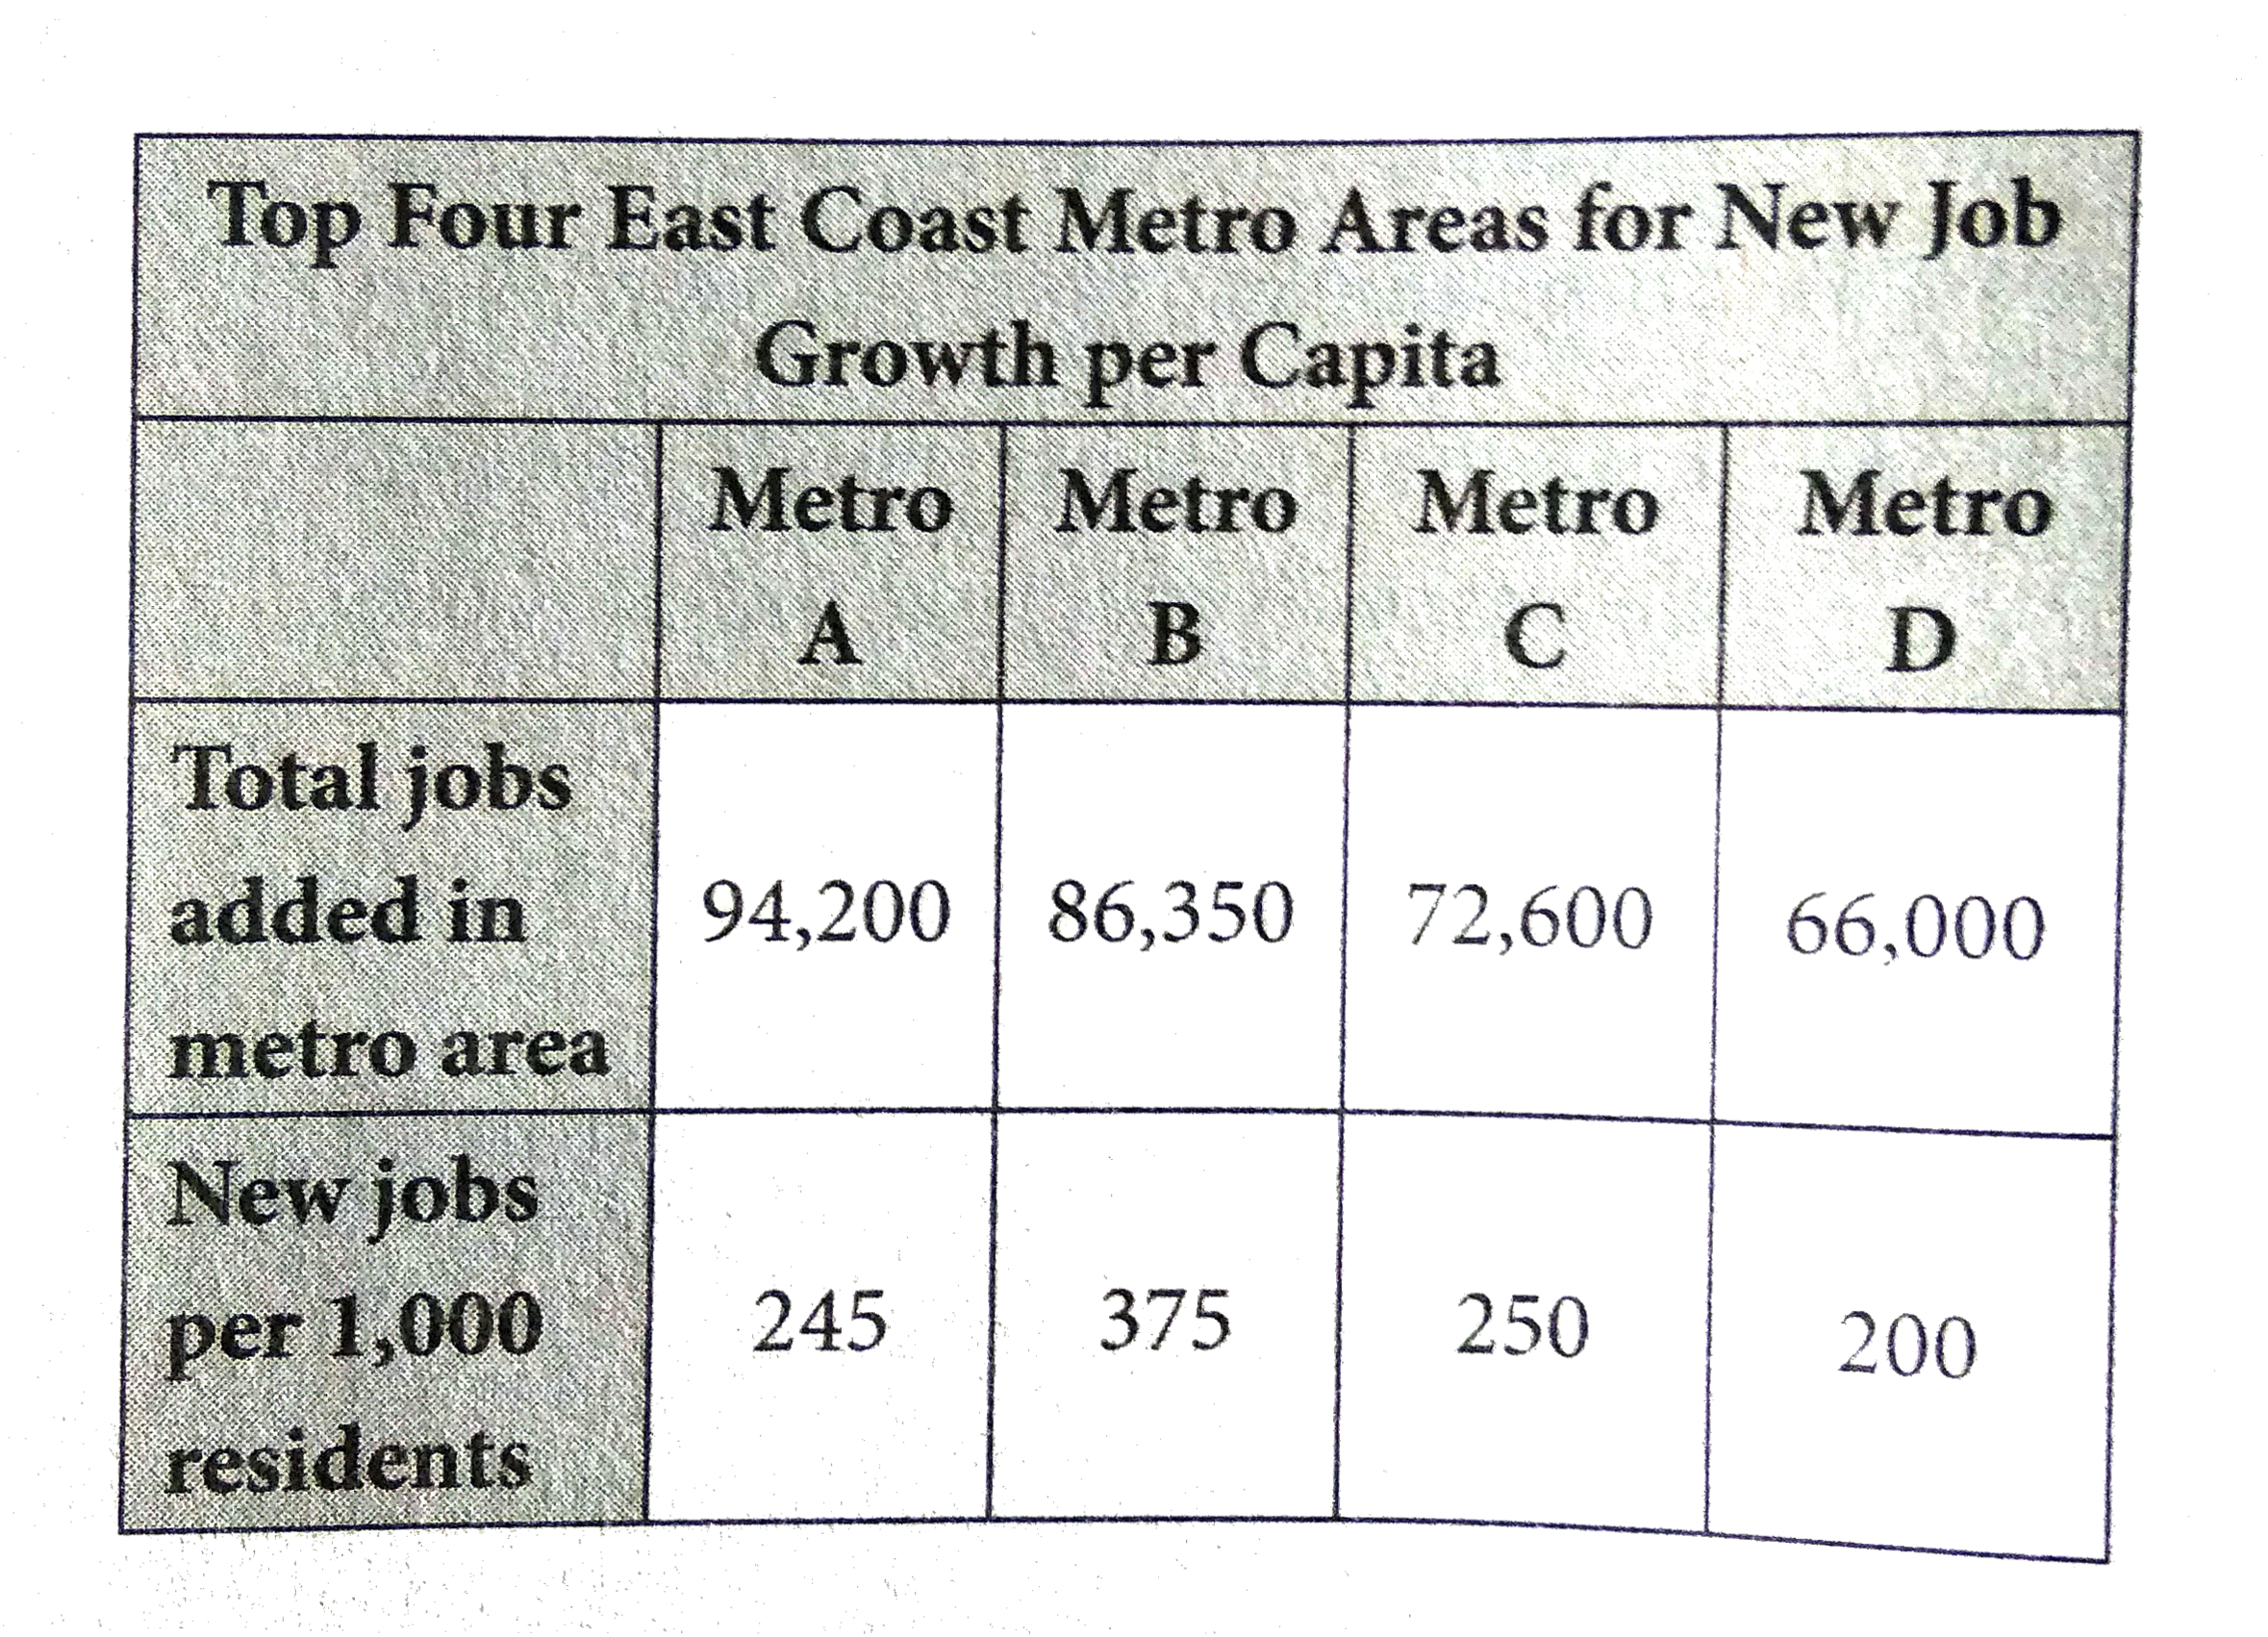 According to the information in the table, which of the following correctly orders the population of the  metro areas from greatest to least?